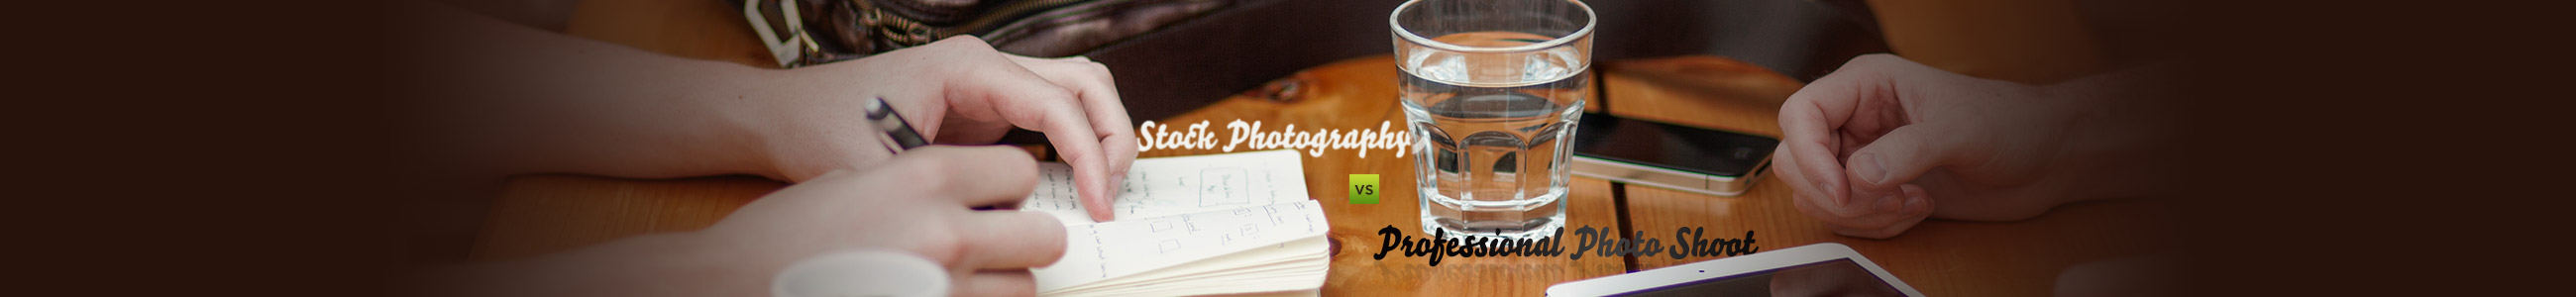 When To Use Stock Photography and When to Go Pro